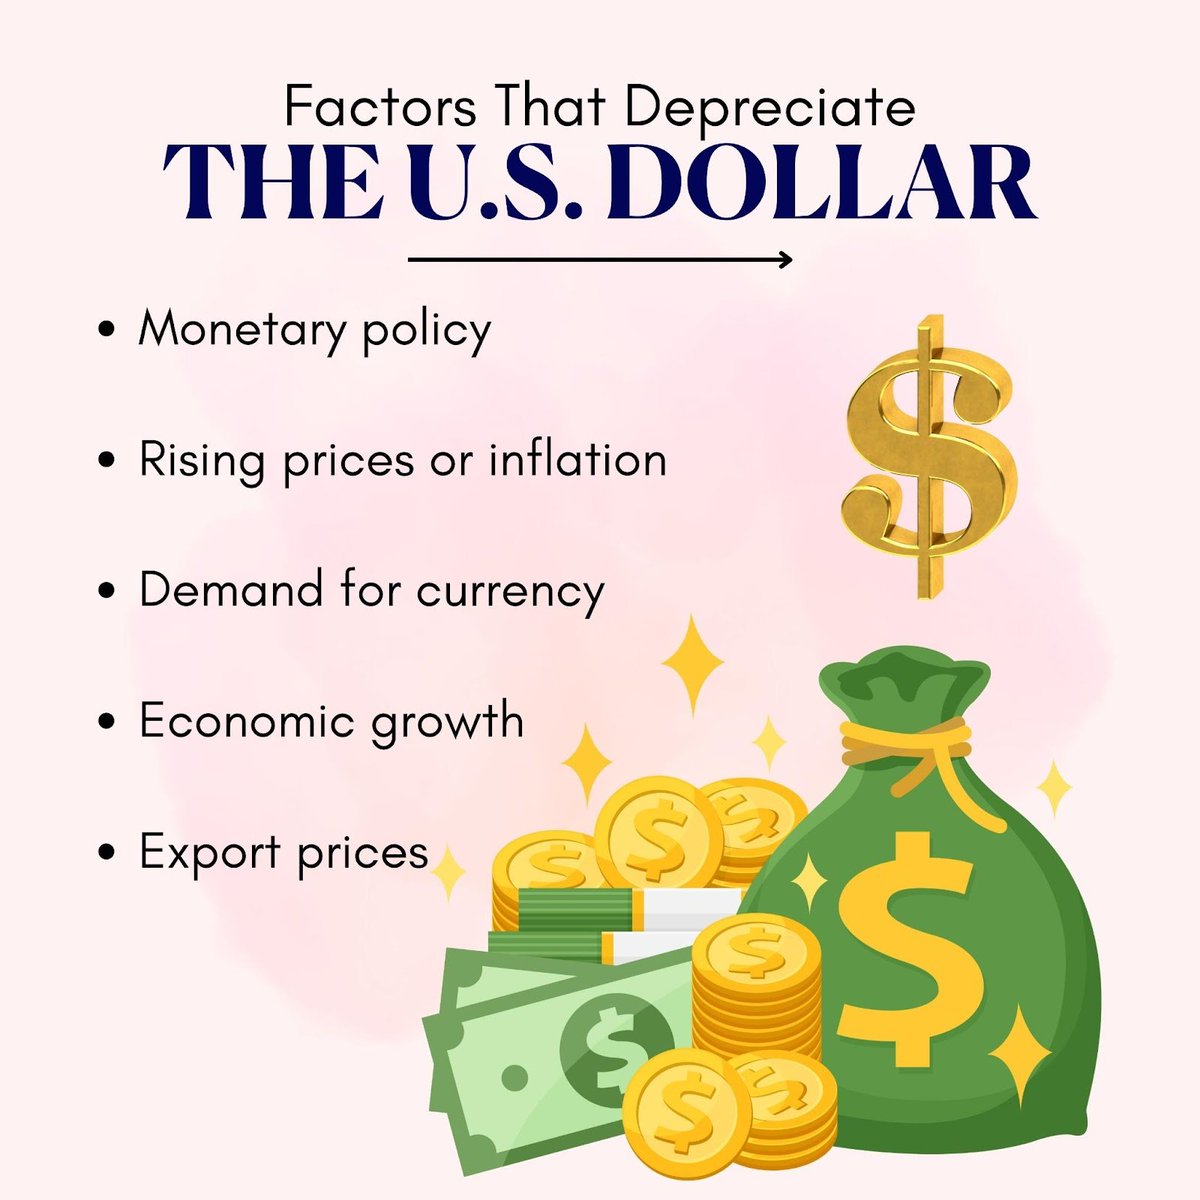 The U.S. Dollar can depreciate due to a variety of economic and geopolitical factors, such as inflation, low interest rates, trade deficits, and political instability. 
.
#financialgoals #investing101 #indexfundinvesting #financialliteracy #realestateeducation